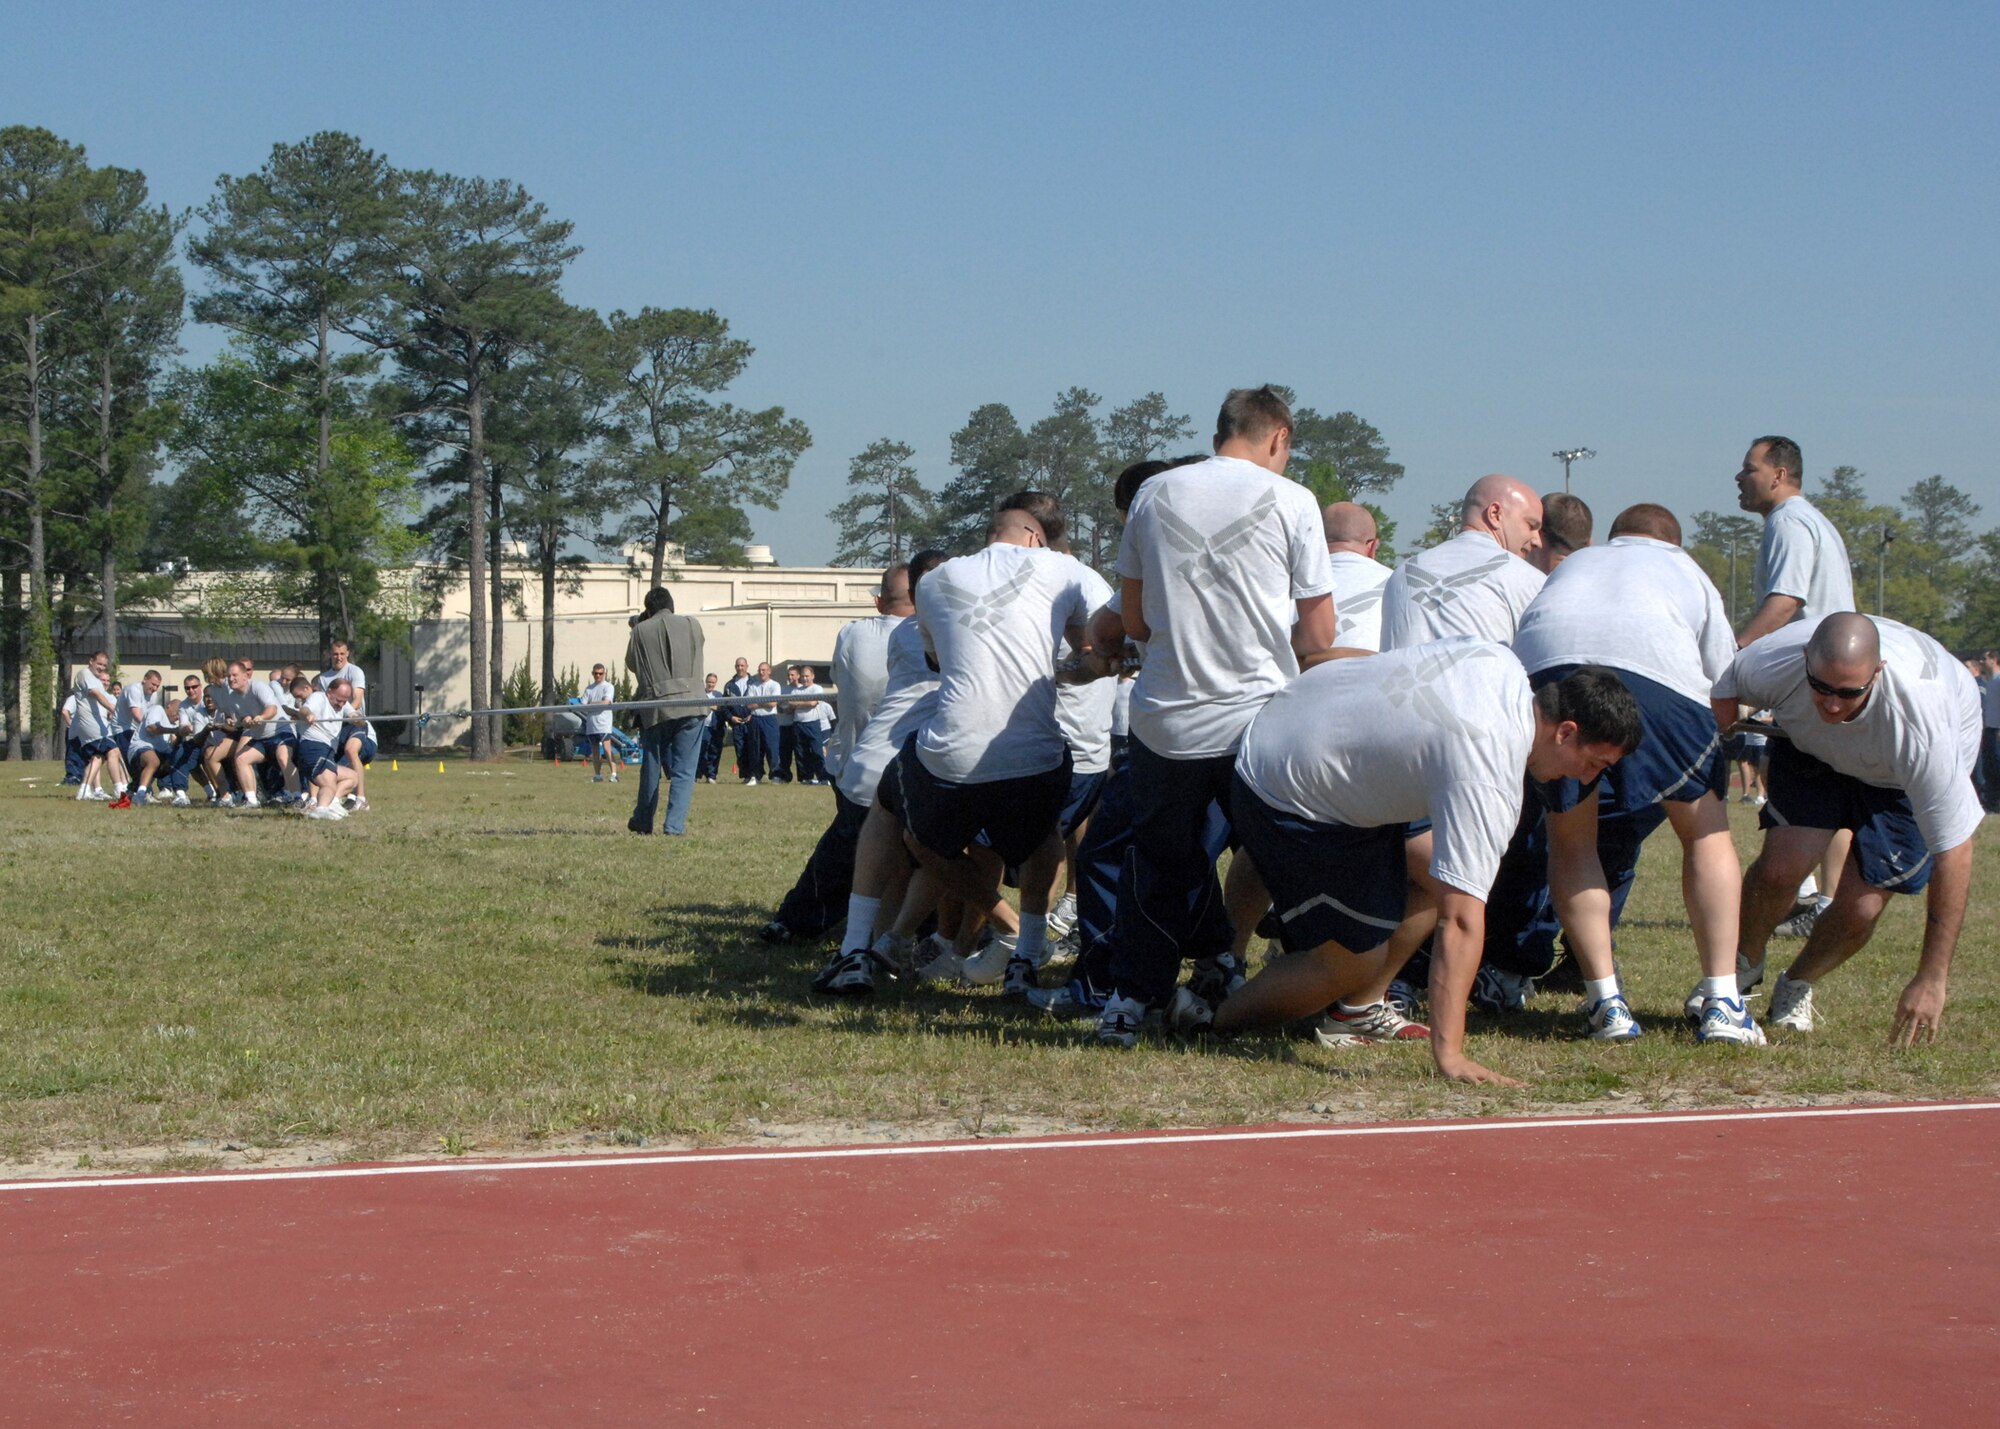 SEYMOUR JOHNSON AIR FORCE BASE, N.C. - Members of the 4th Fighter Wing, compete in a tug-o-war during Wingman Warrior Day on April 18. Wingman Warrior Day brings together Airmen of the 4th Fighter Wing to forge mind, body and soul with lifeskill classes, sports events and skills training. (U.S. Air Force photo by Airman First Class Jonathon Williams)